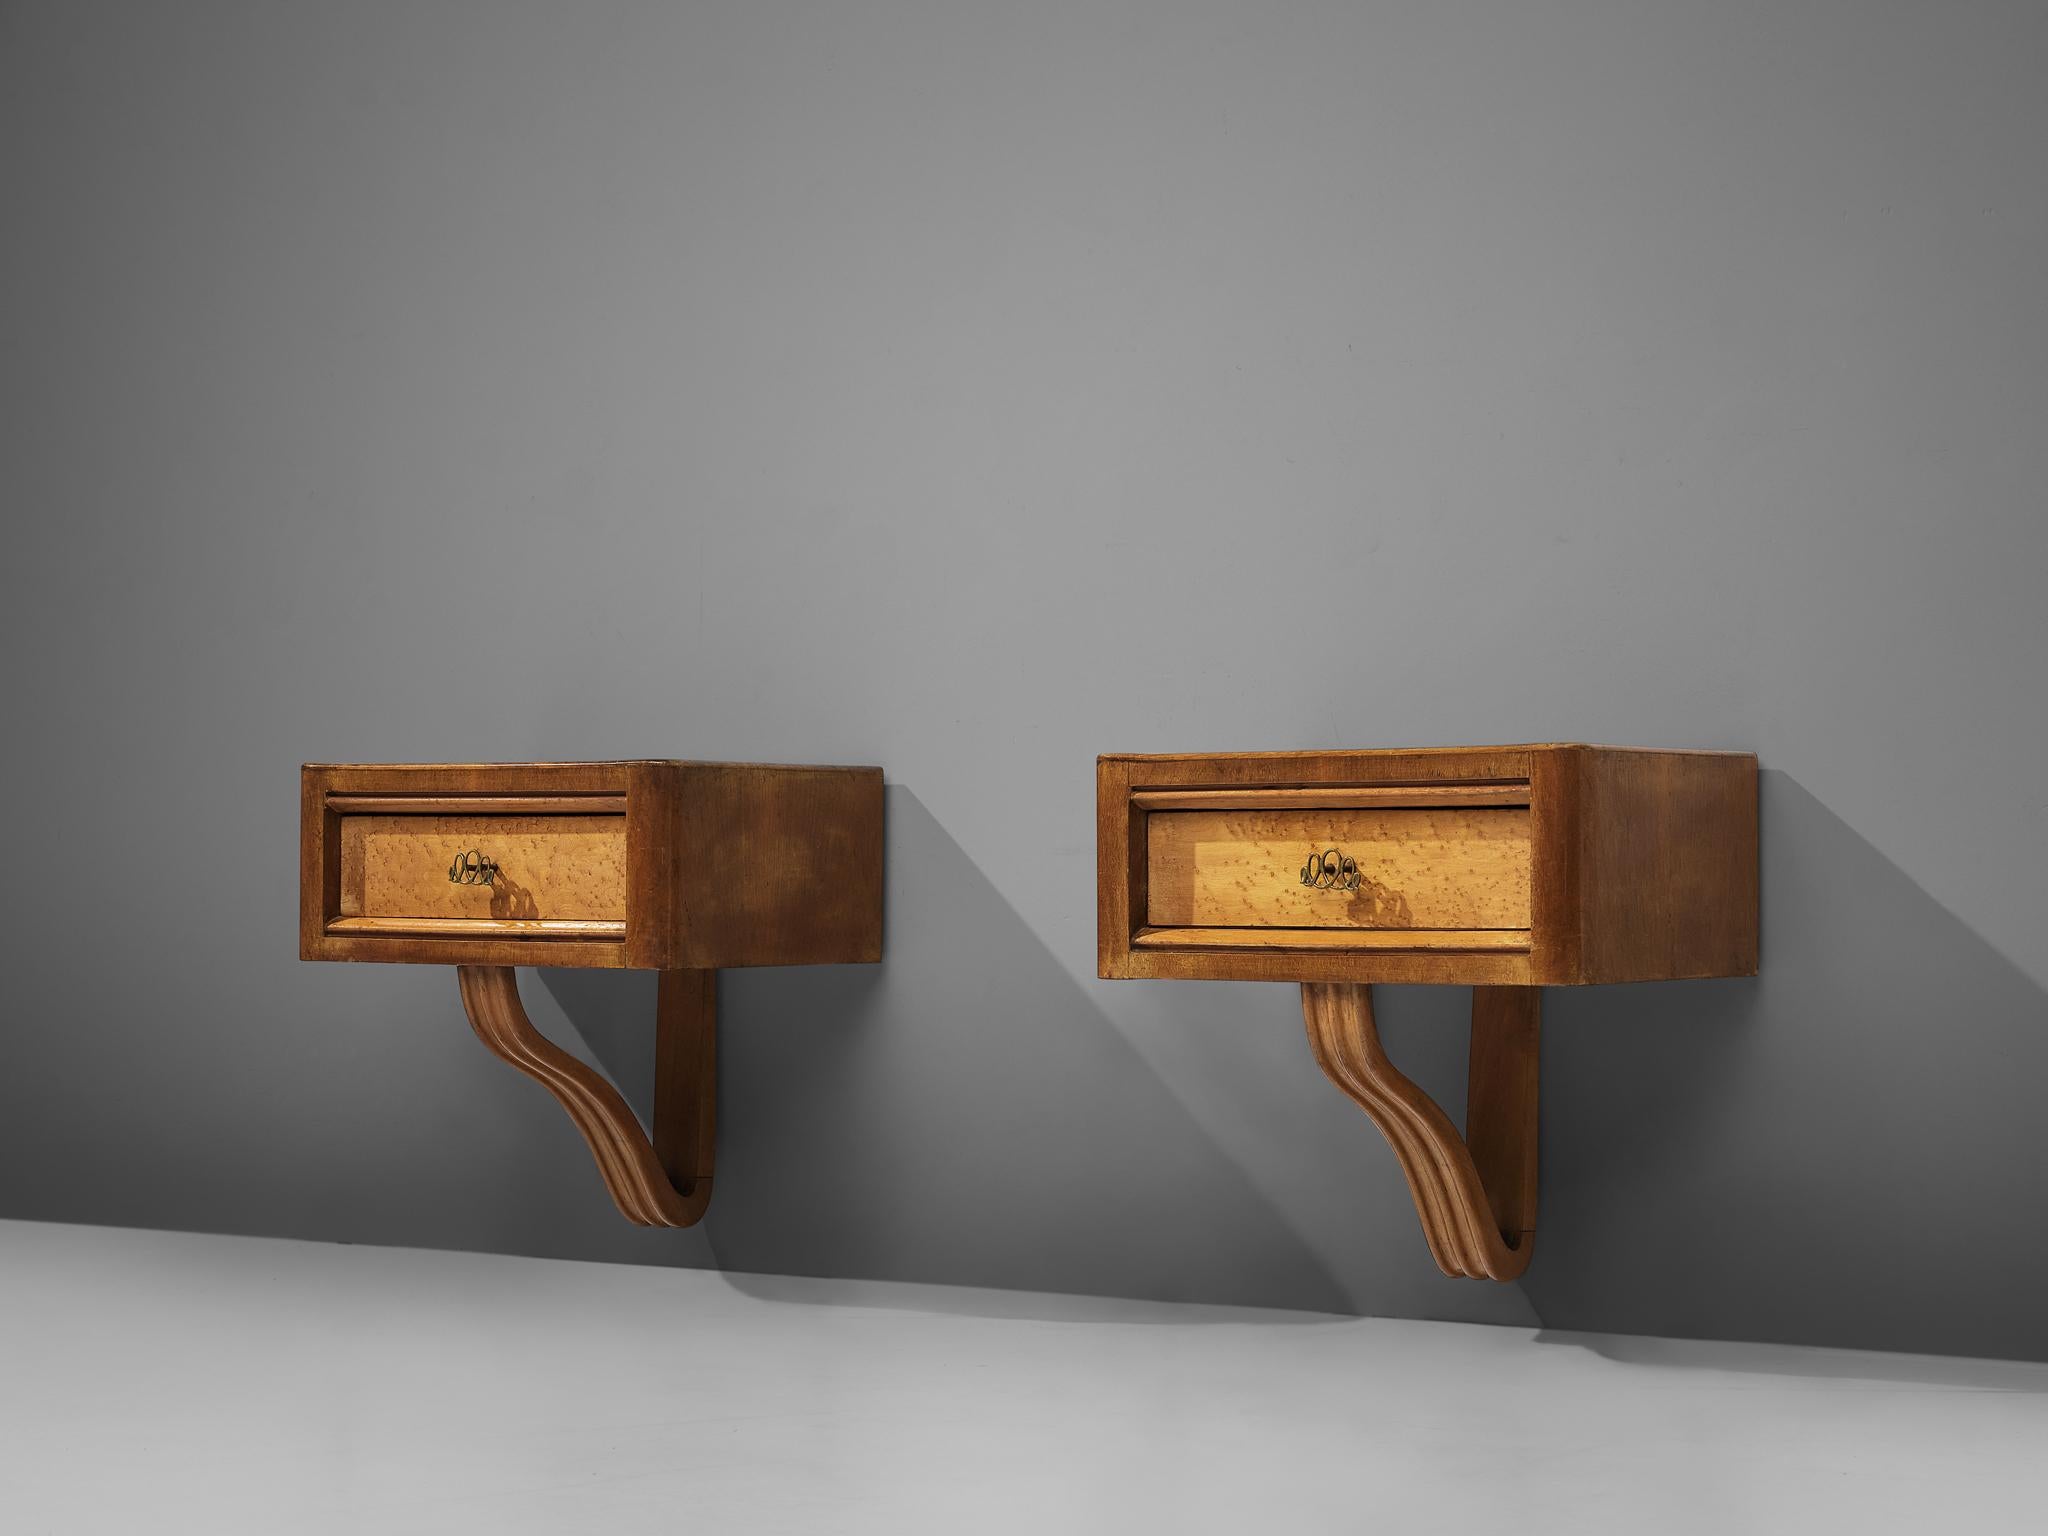 Pair of hanging nightstands, walnut, bird's eye maple, brass, Italy, 1950s

This delicate pair of wall-mounted night stands features one drawers resting on a volute. The front of the drawers is highlighted with a bright veneer and accentuated with